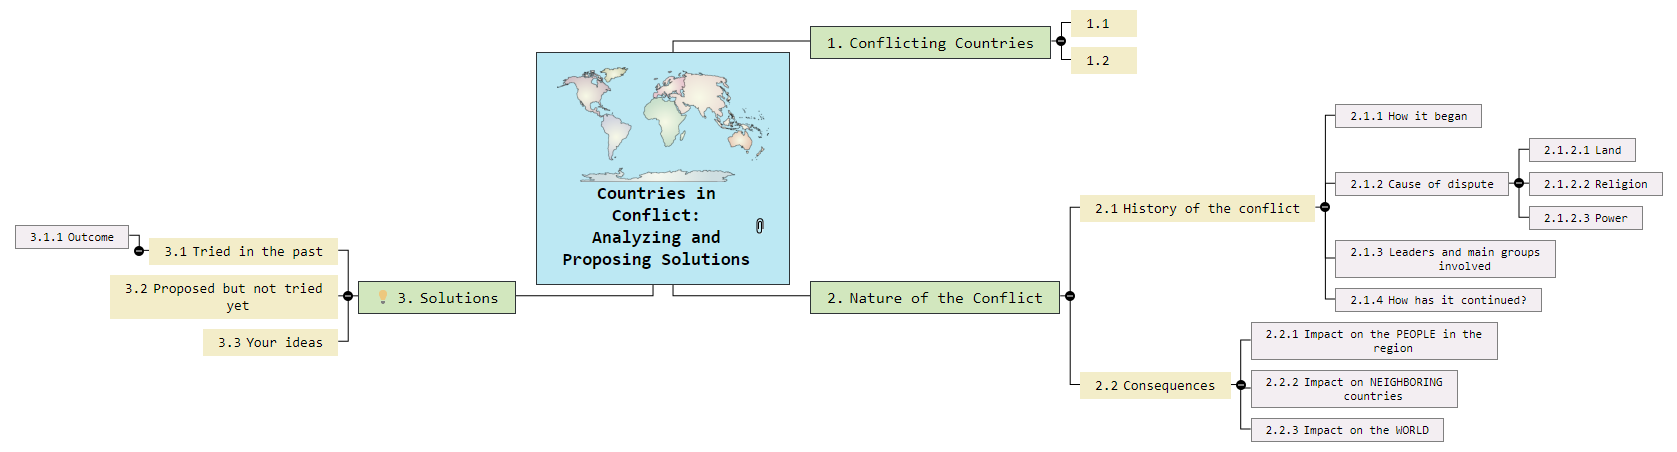 Countries in Conflict Mind Map